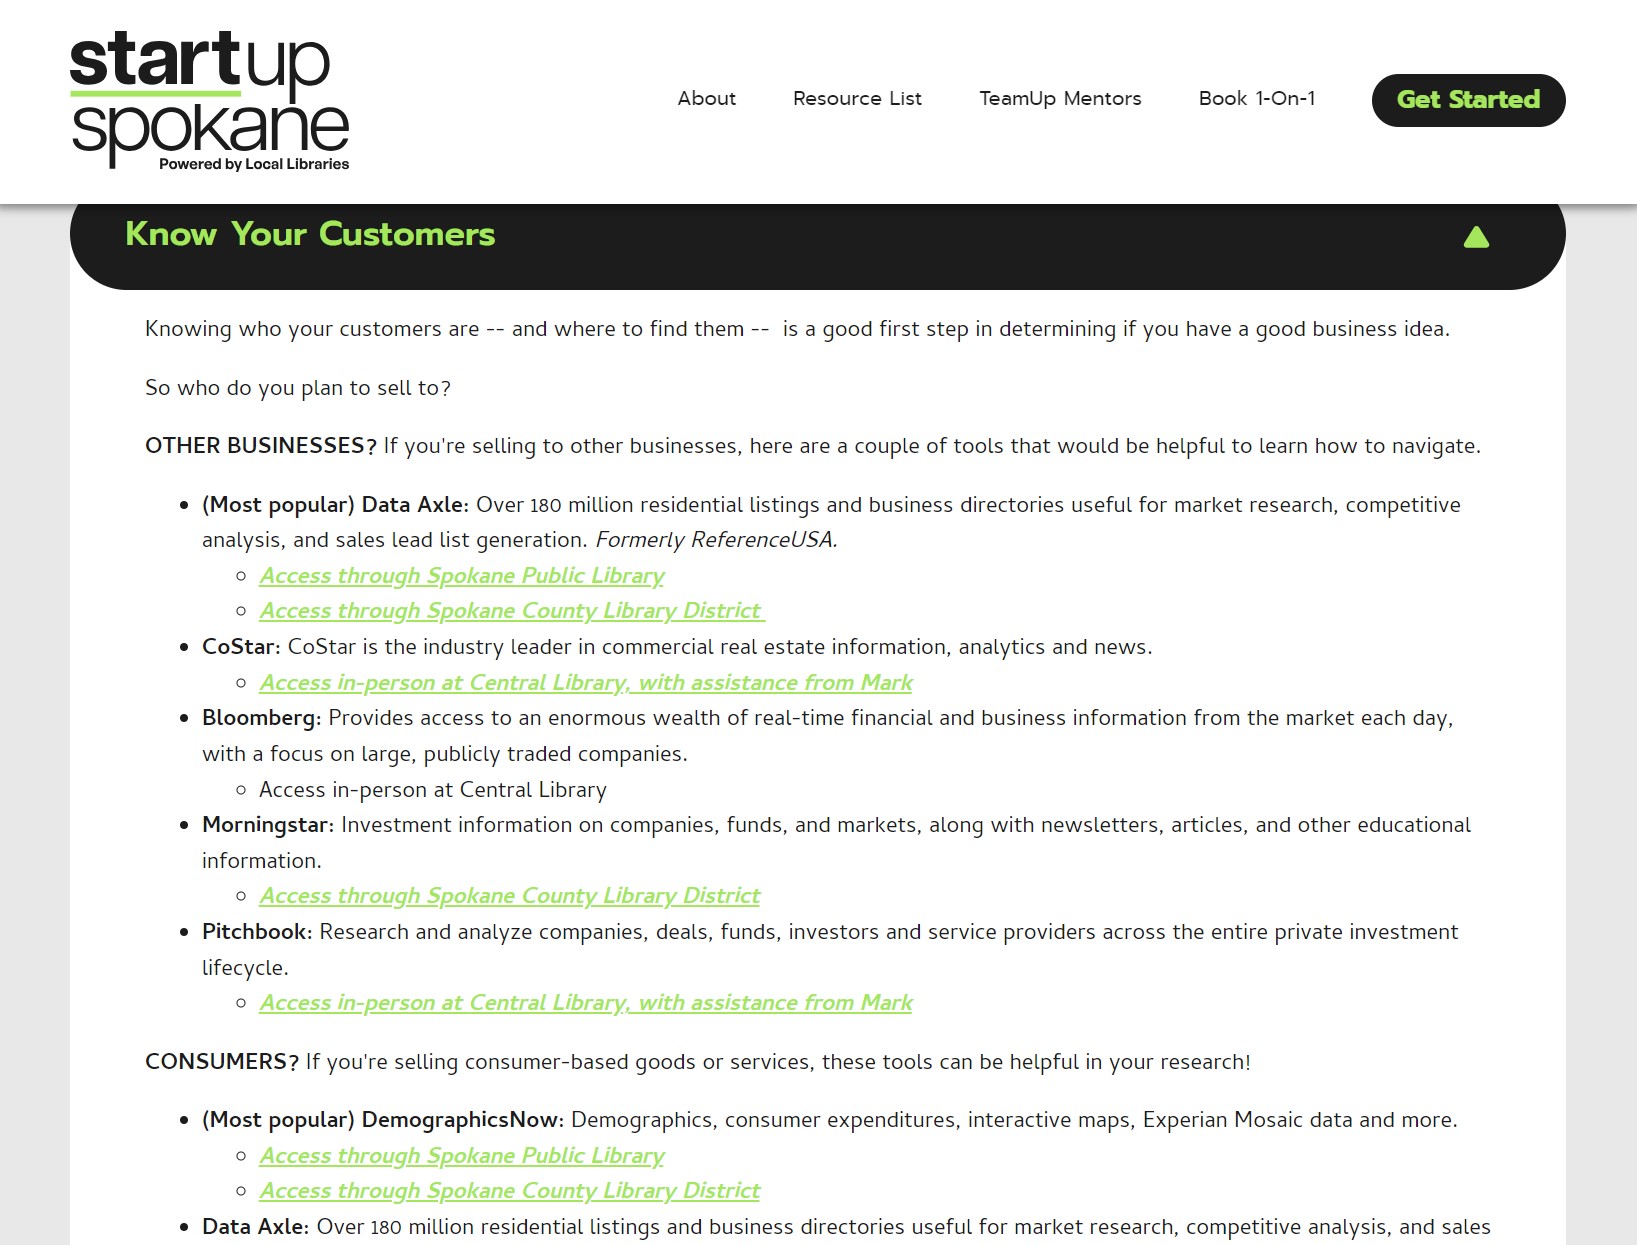 Screenshot of the "Know Your Customers" section of the "Get Started" Plan Your Business webpage for the StartUp Spokane Website